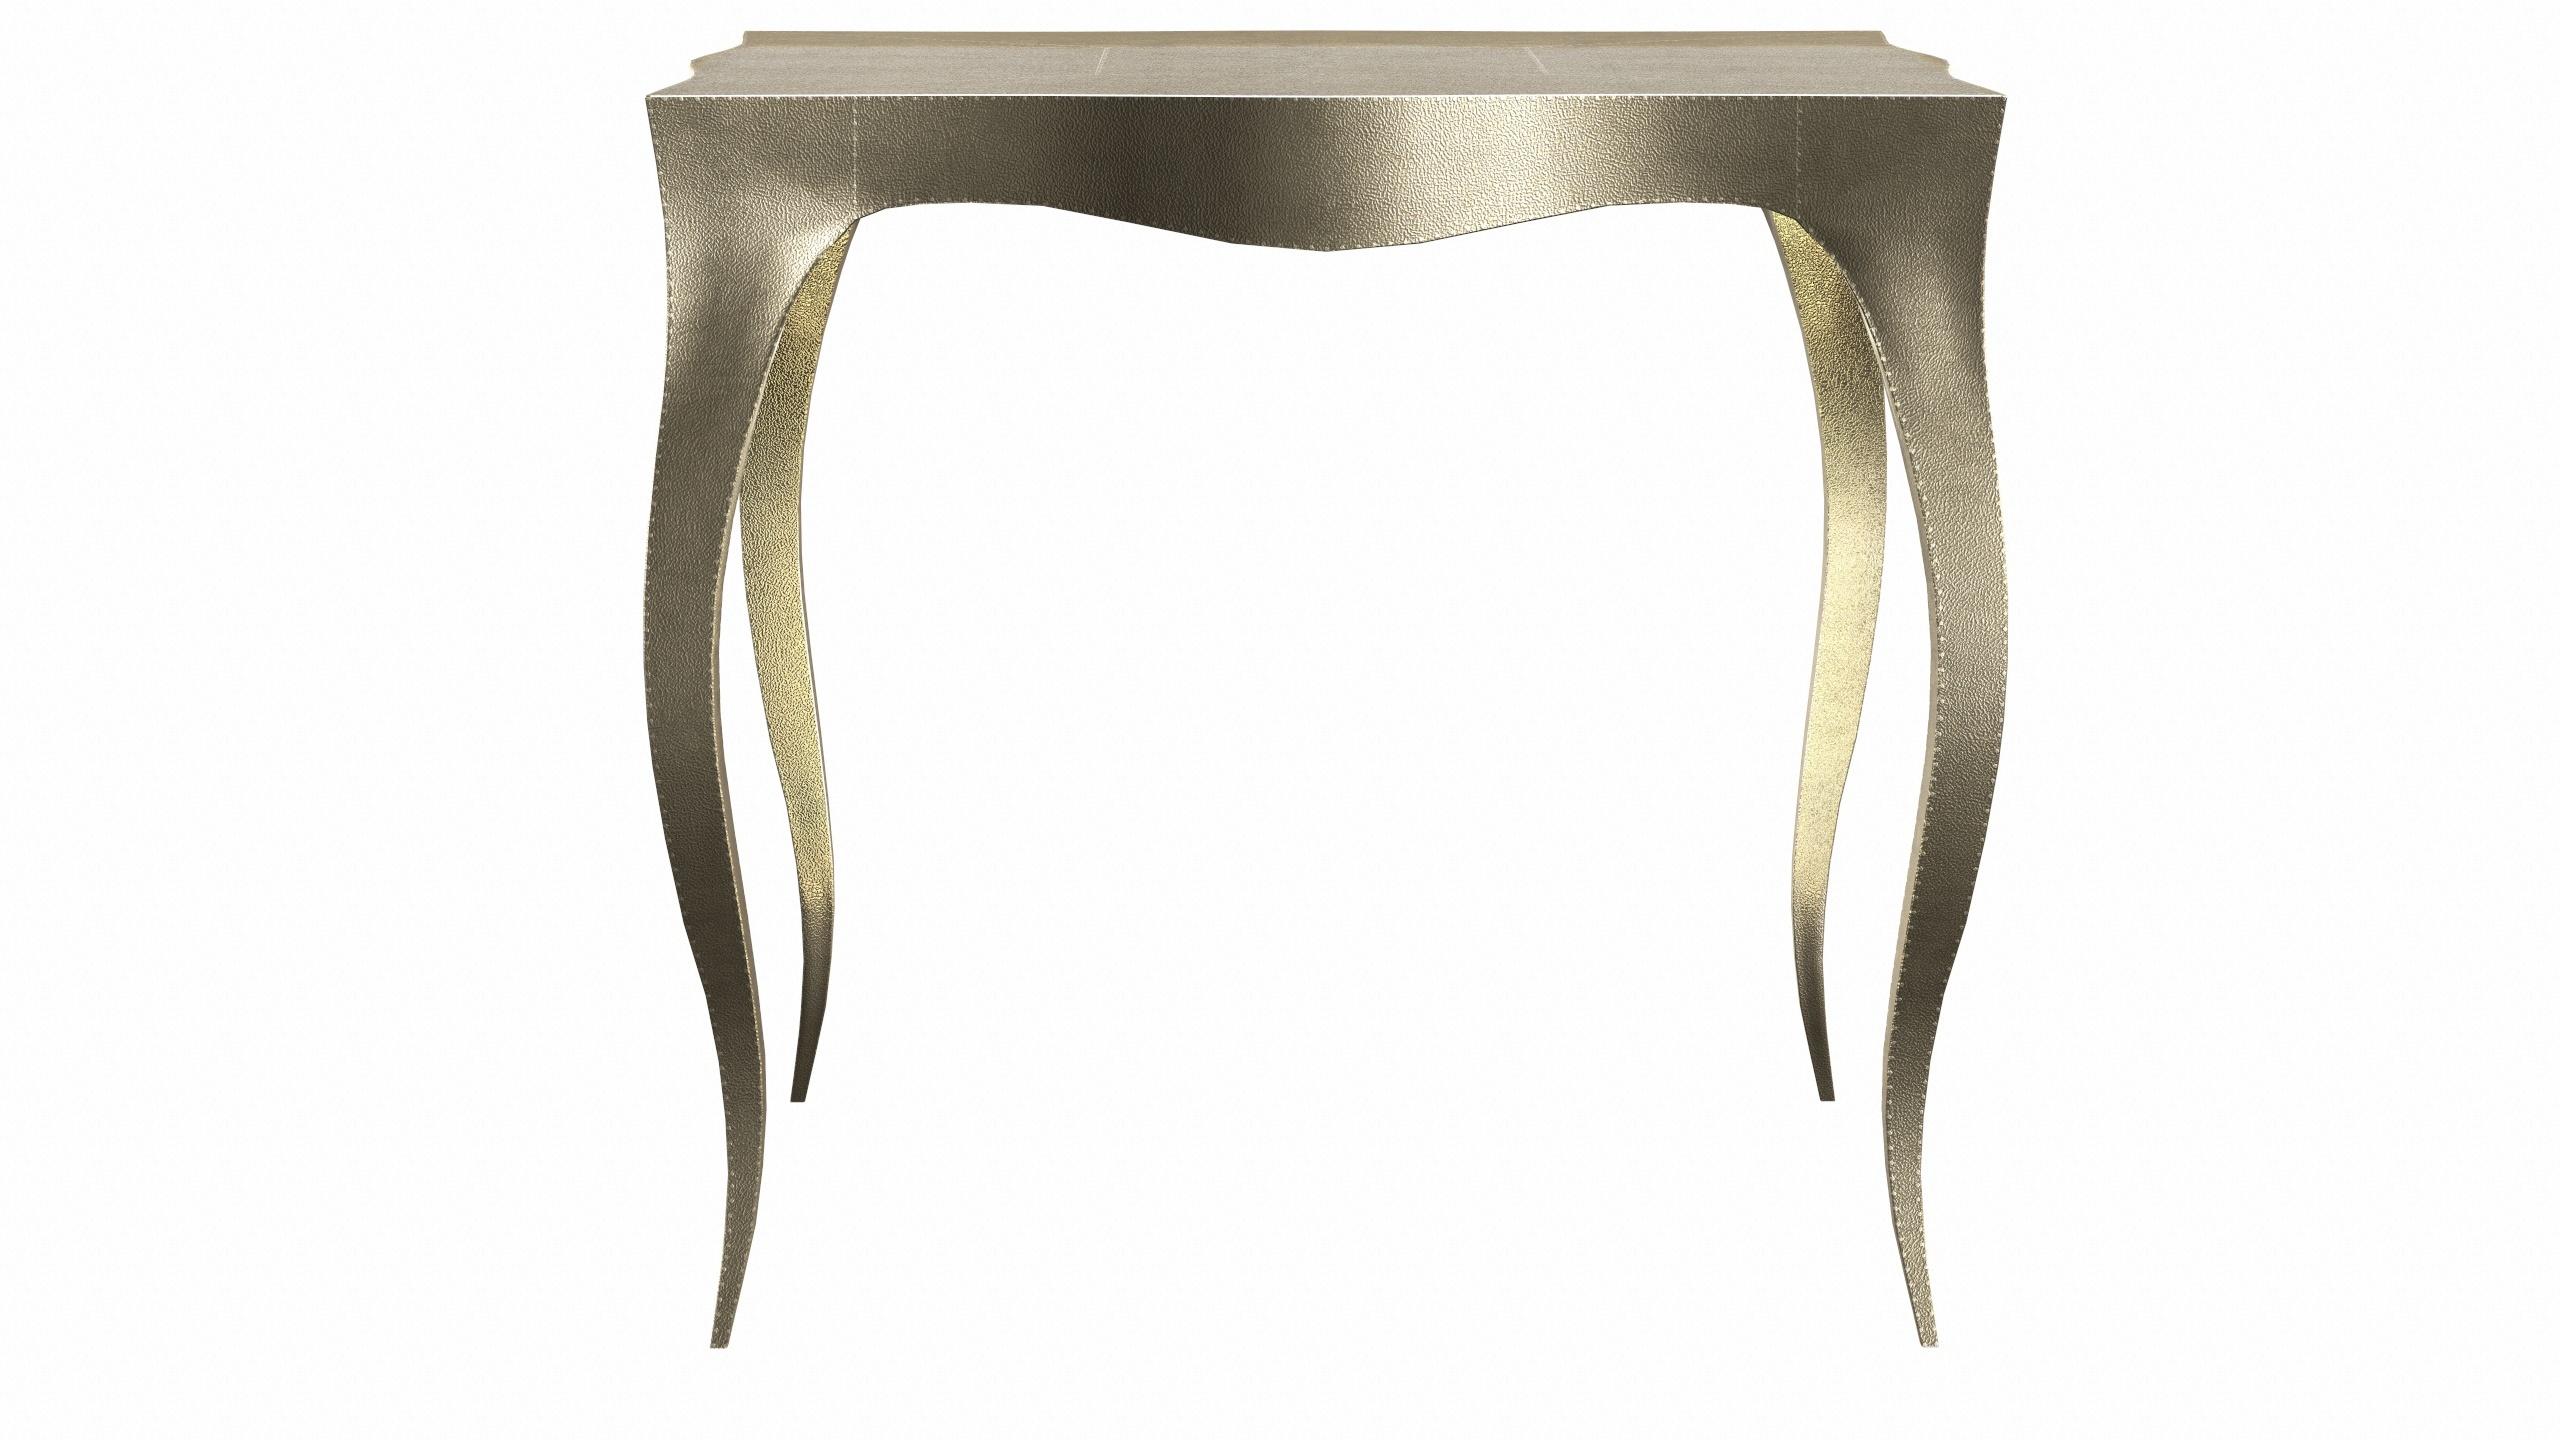 American Louise Art Deco Center Tables Fine Hammered Brass by Paul Mathieu for S. Odegard For Sale